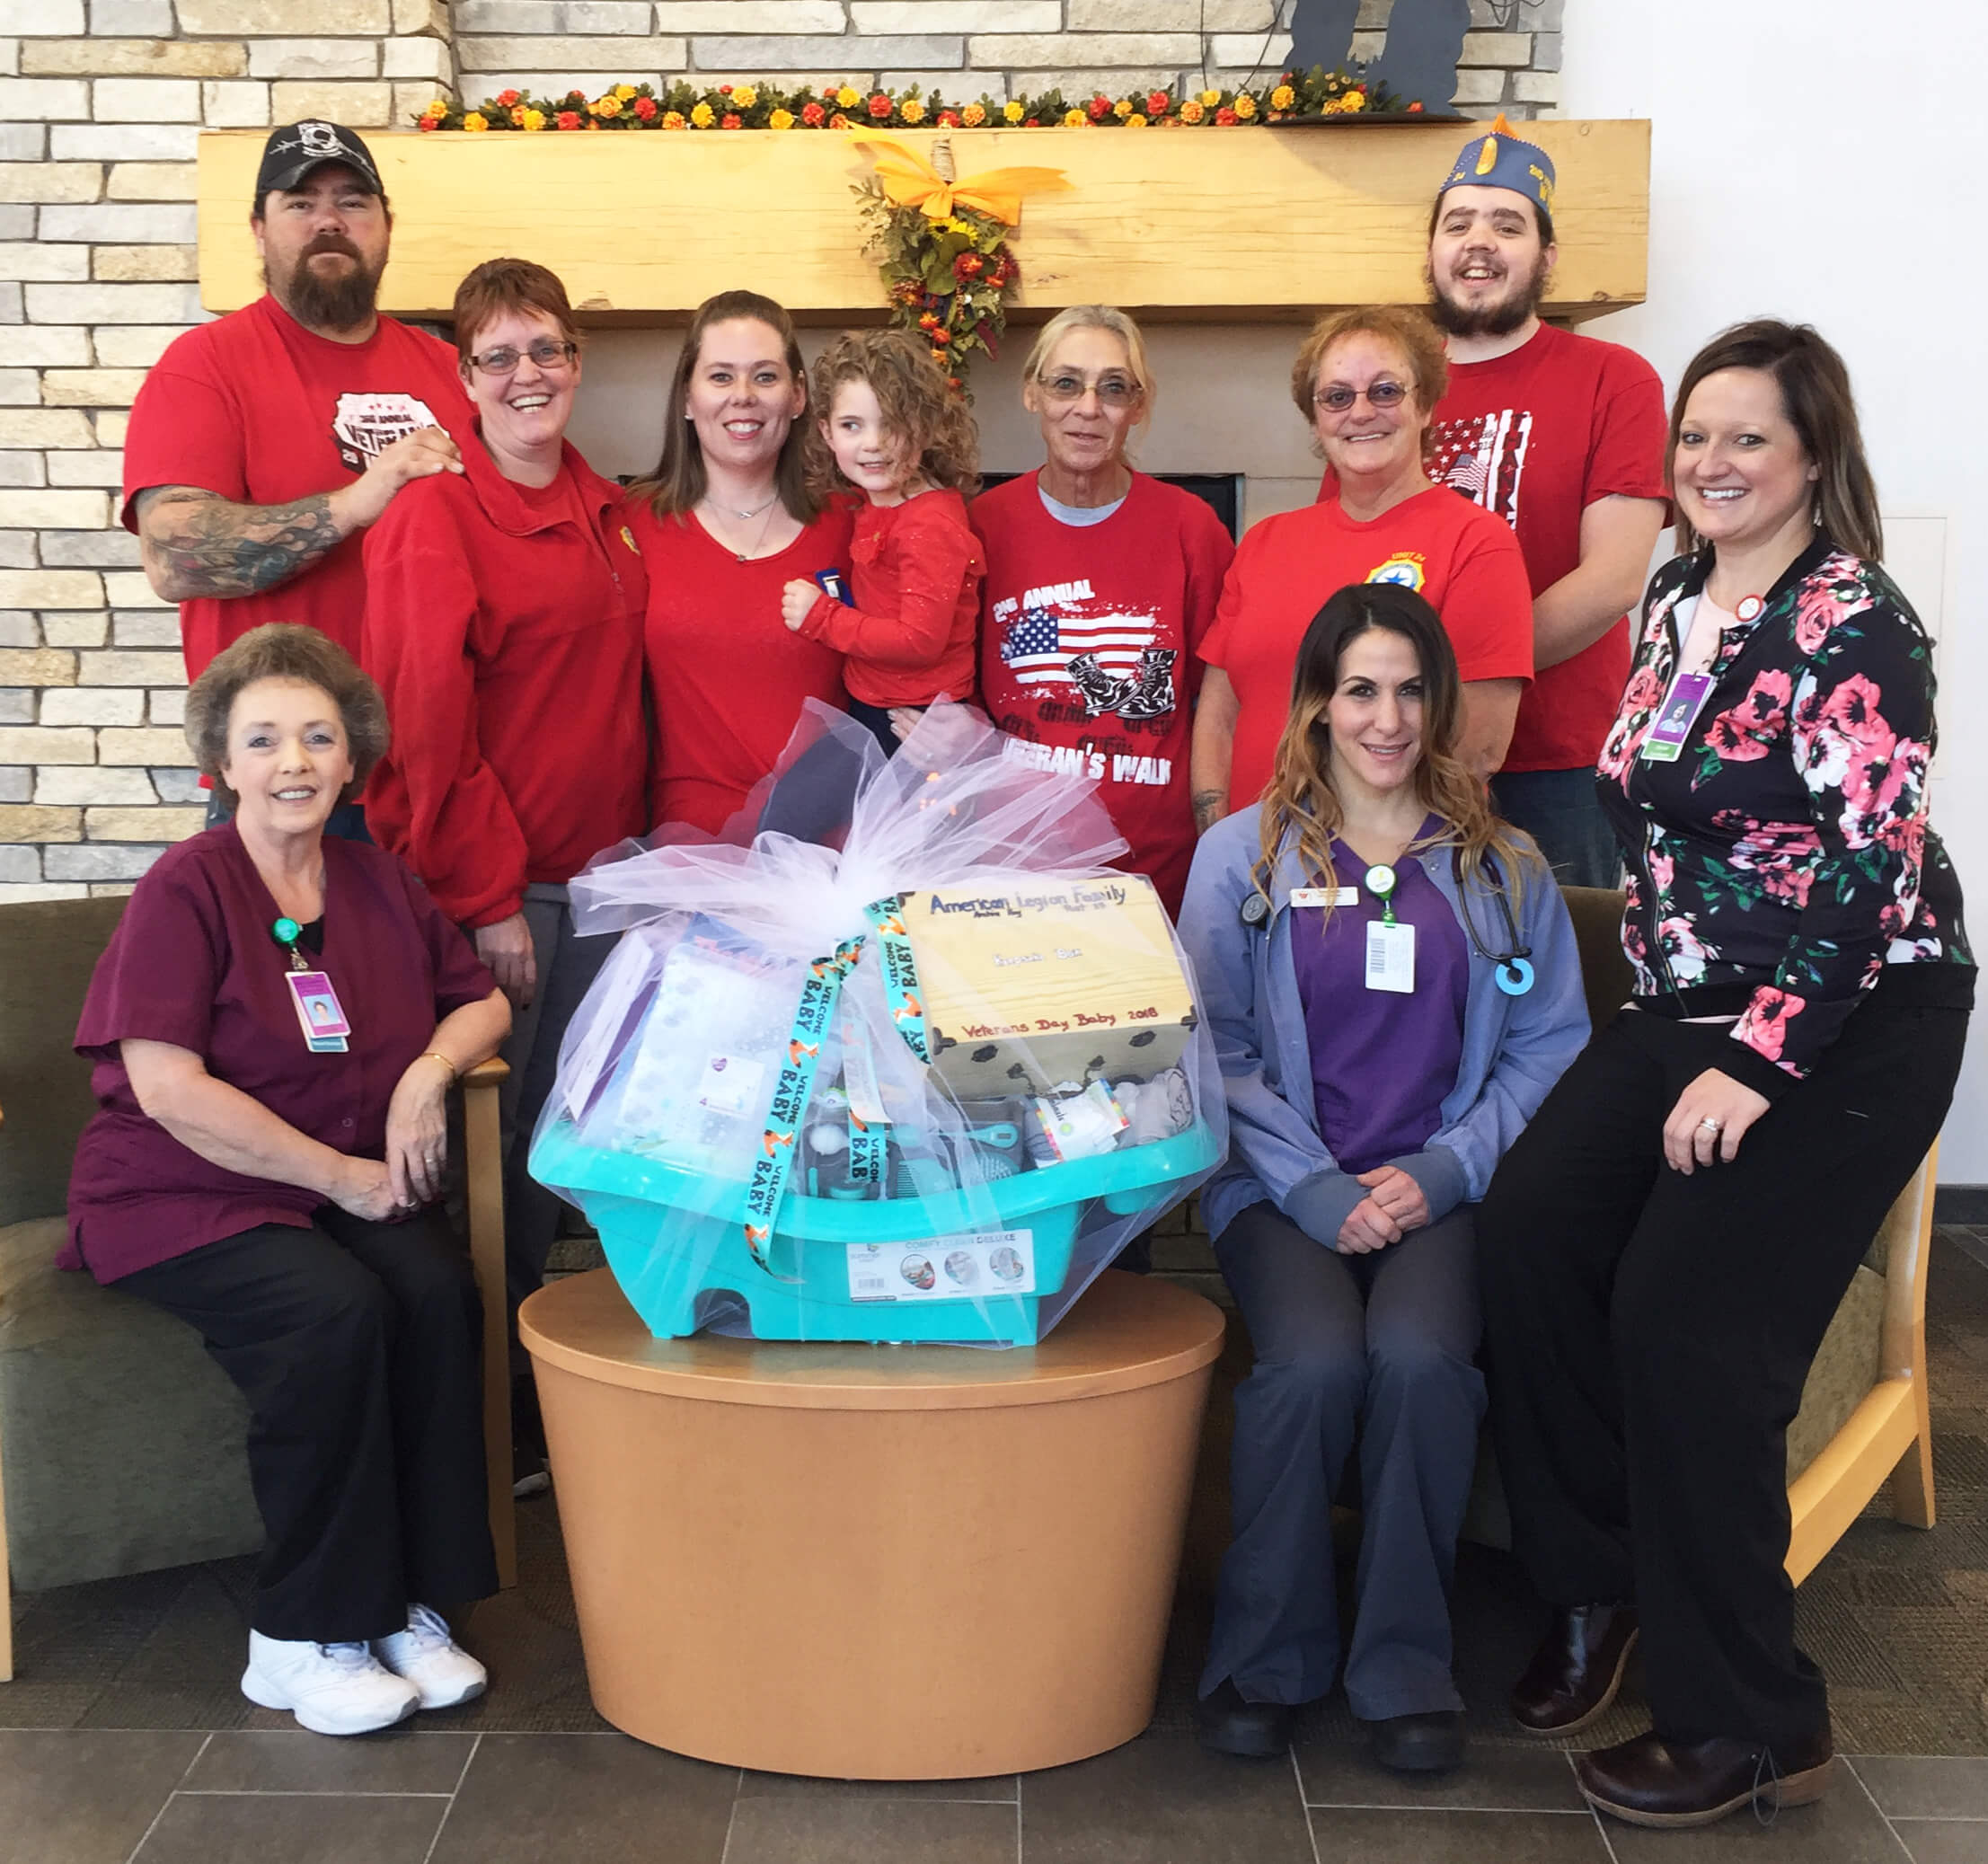 Representatives of American Legion Archie Hay Post 24 dropped off a basket for the first baby born on or after Veterans Day at Memorial Hospital of Sweetwater County.